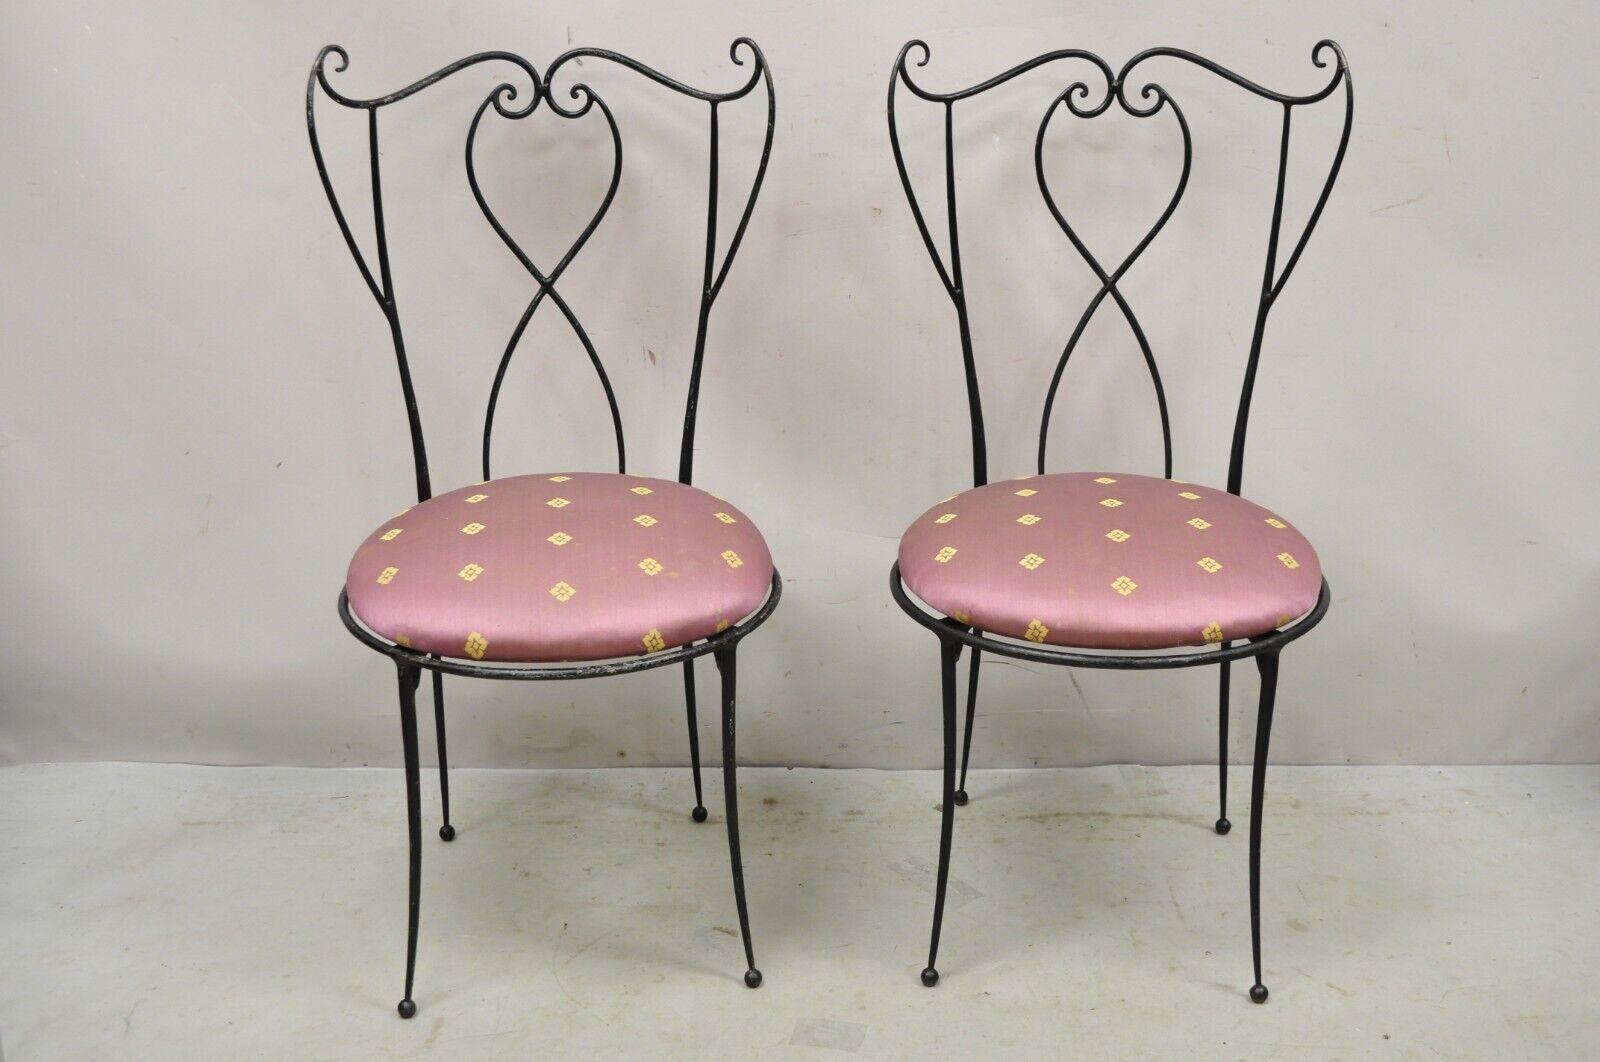 Pair vintage Salterini style Mid-Century Modern wrought iron scrolling side chairs. Item features shapely saber legs, curved backs, wrought iron construction, very nice vintage pair, quality craftsmanship, sleek sculptural form, maker unconfirmed